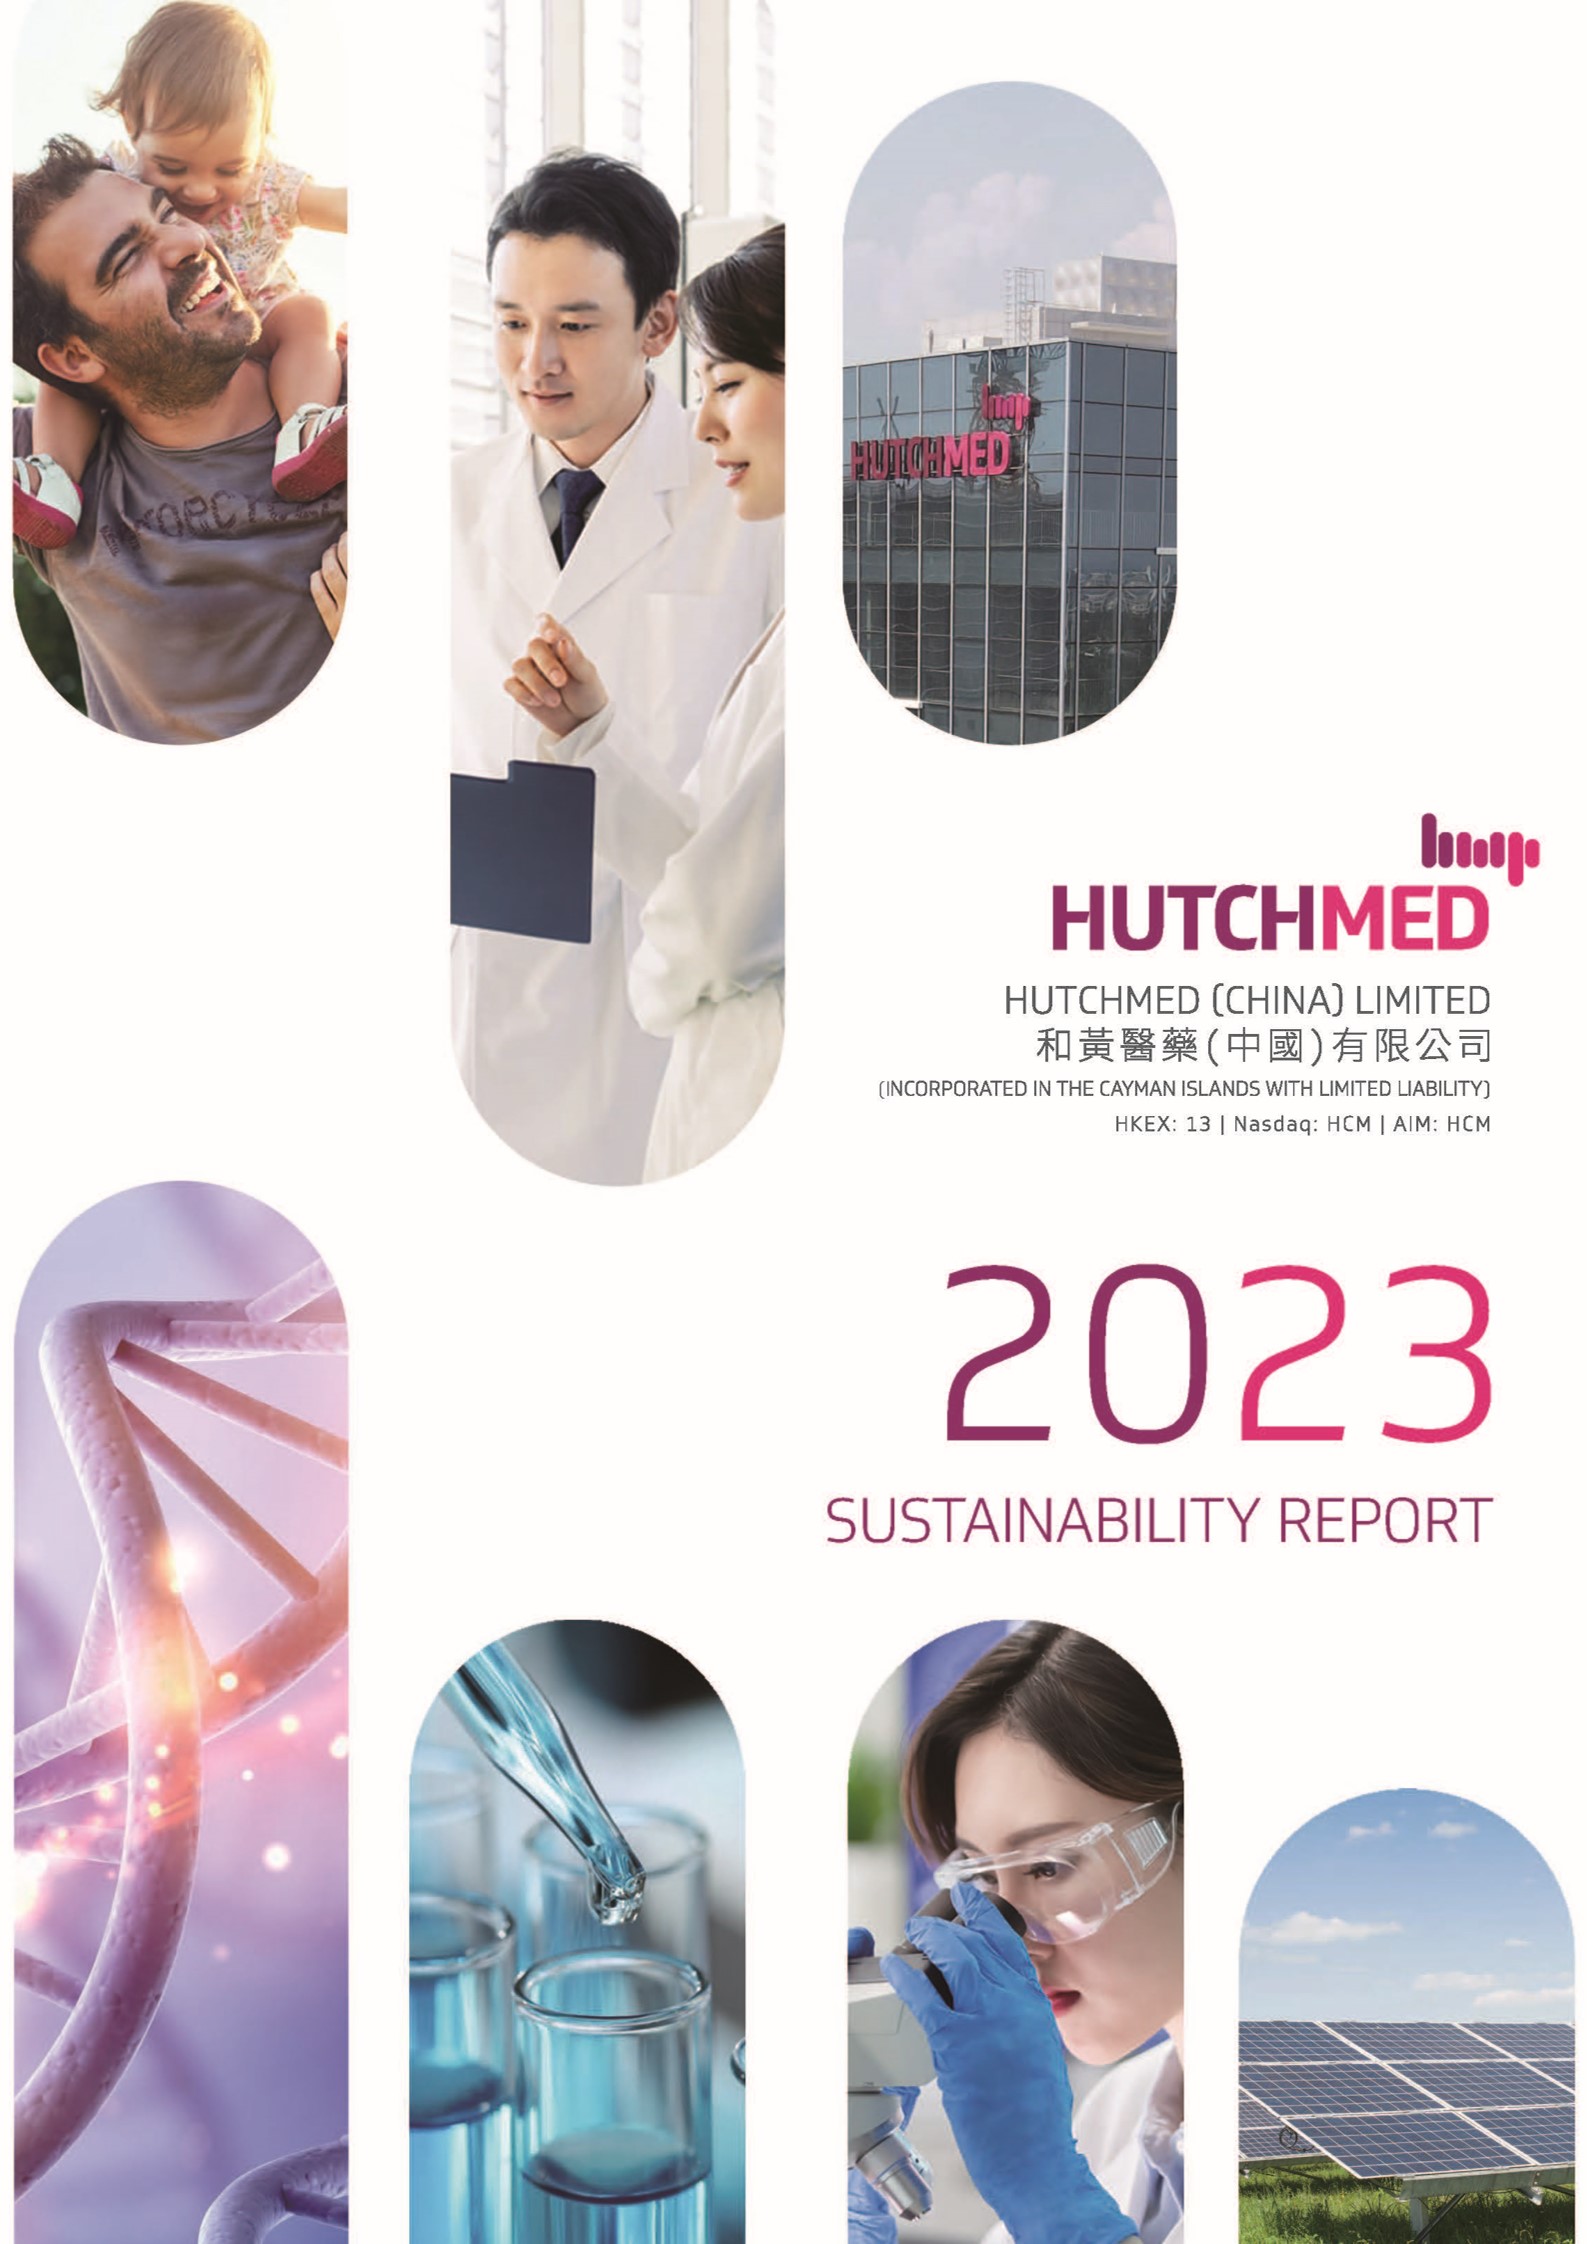 HUTCHMED 2023 Sustainability Report